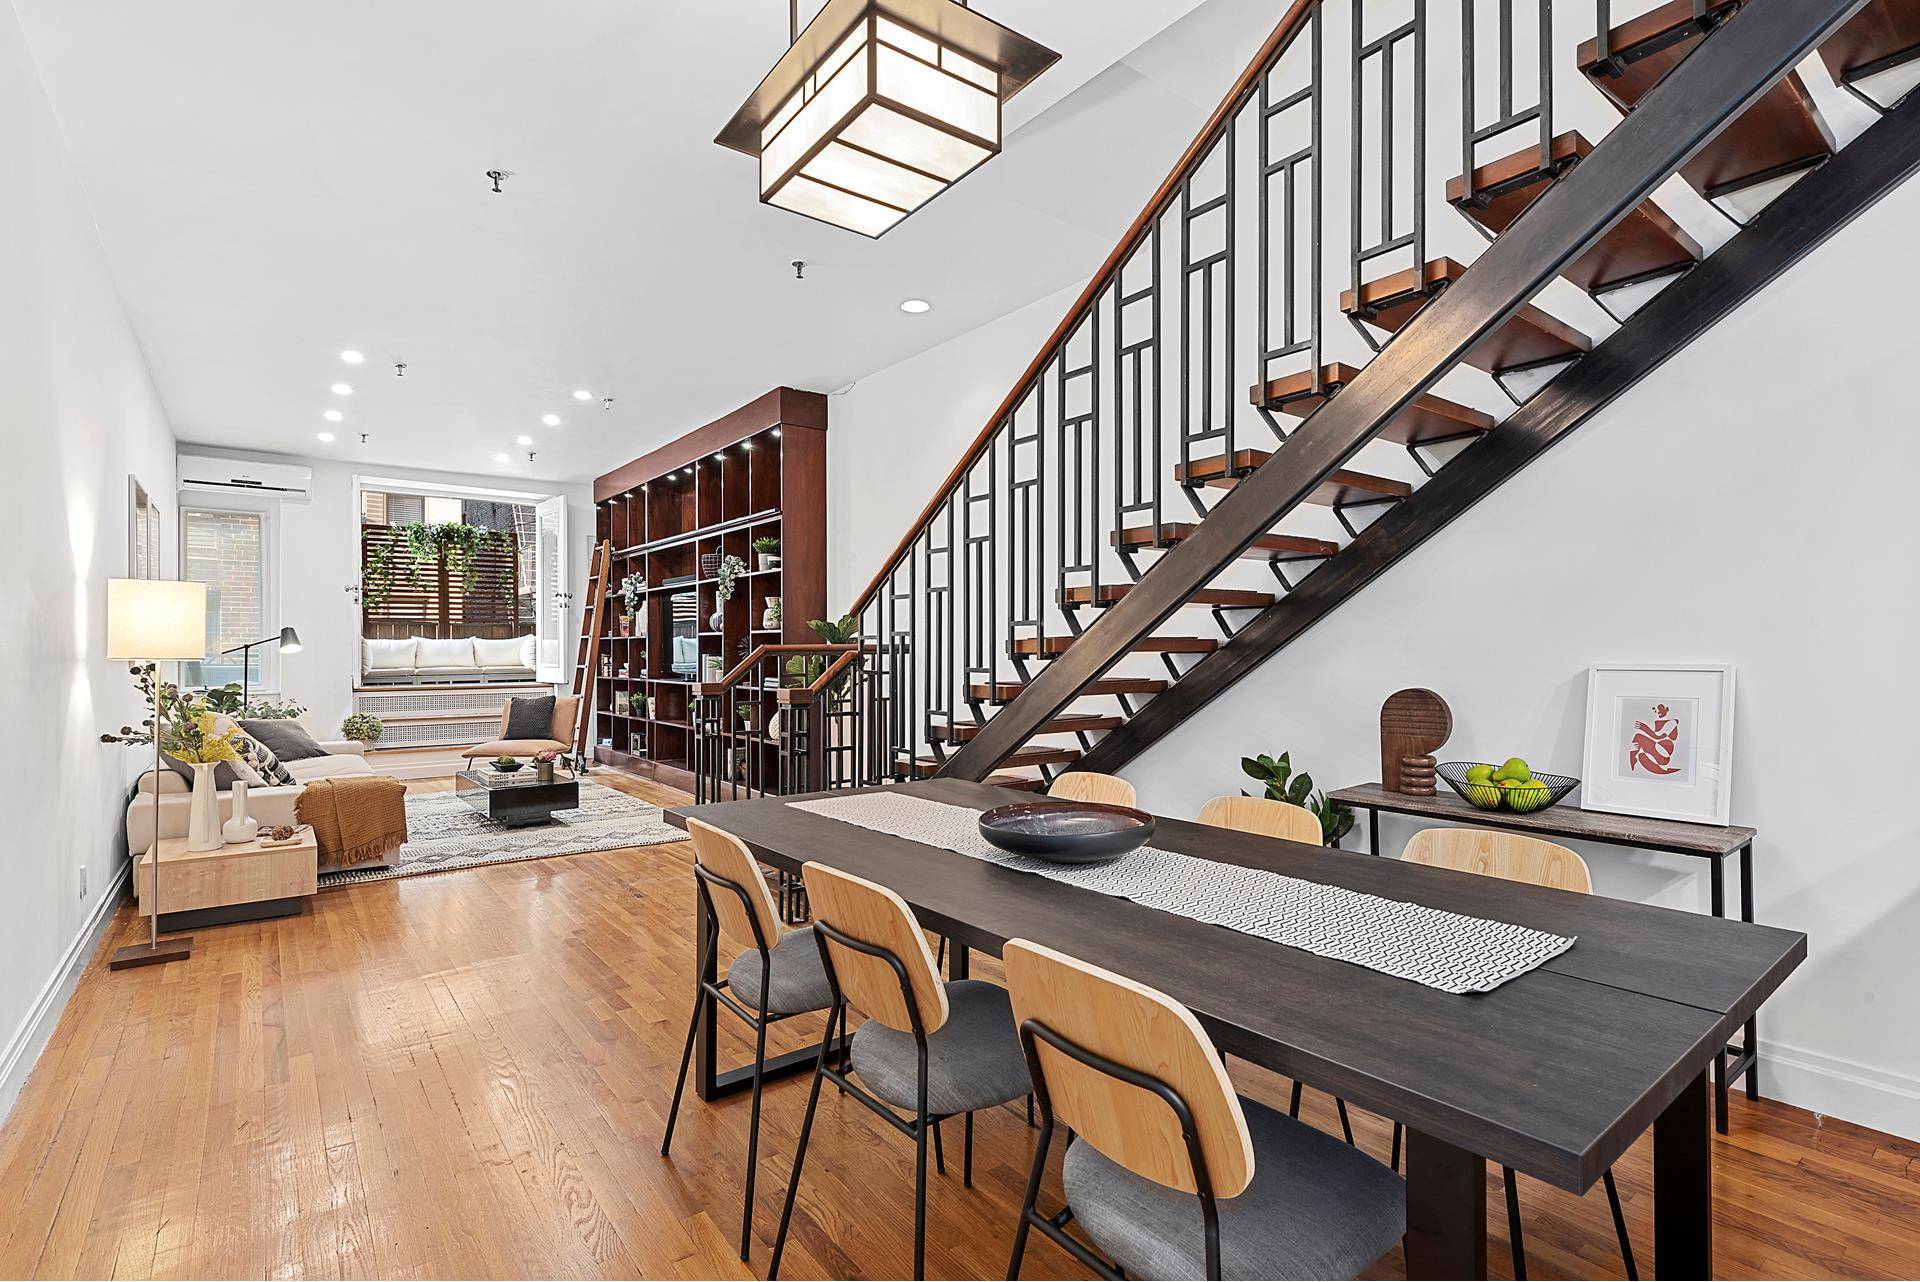 Welcome home to this ultra stylish, expansive, gracious one of a kind, classic prewar 2BR 2BA duplex loft with two balconies, high ceilings, recessed lighting, custom crafted staircase, hardwood floors, ...